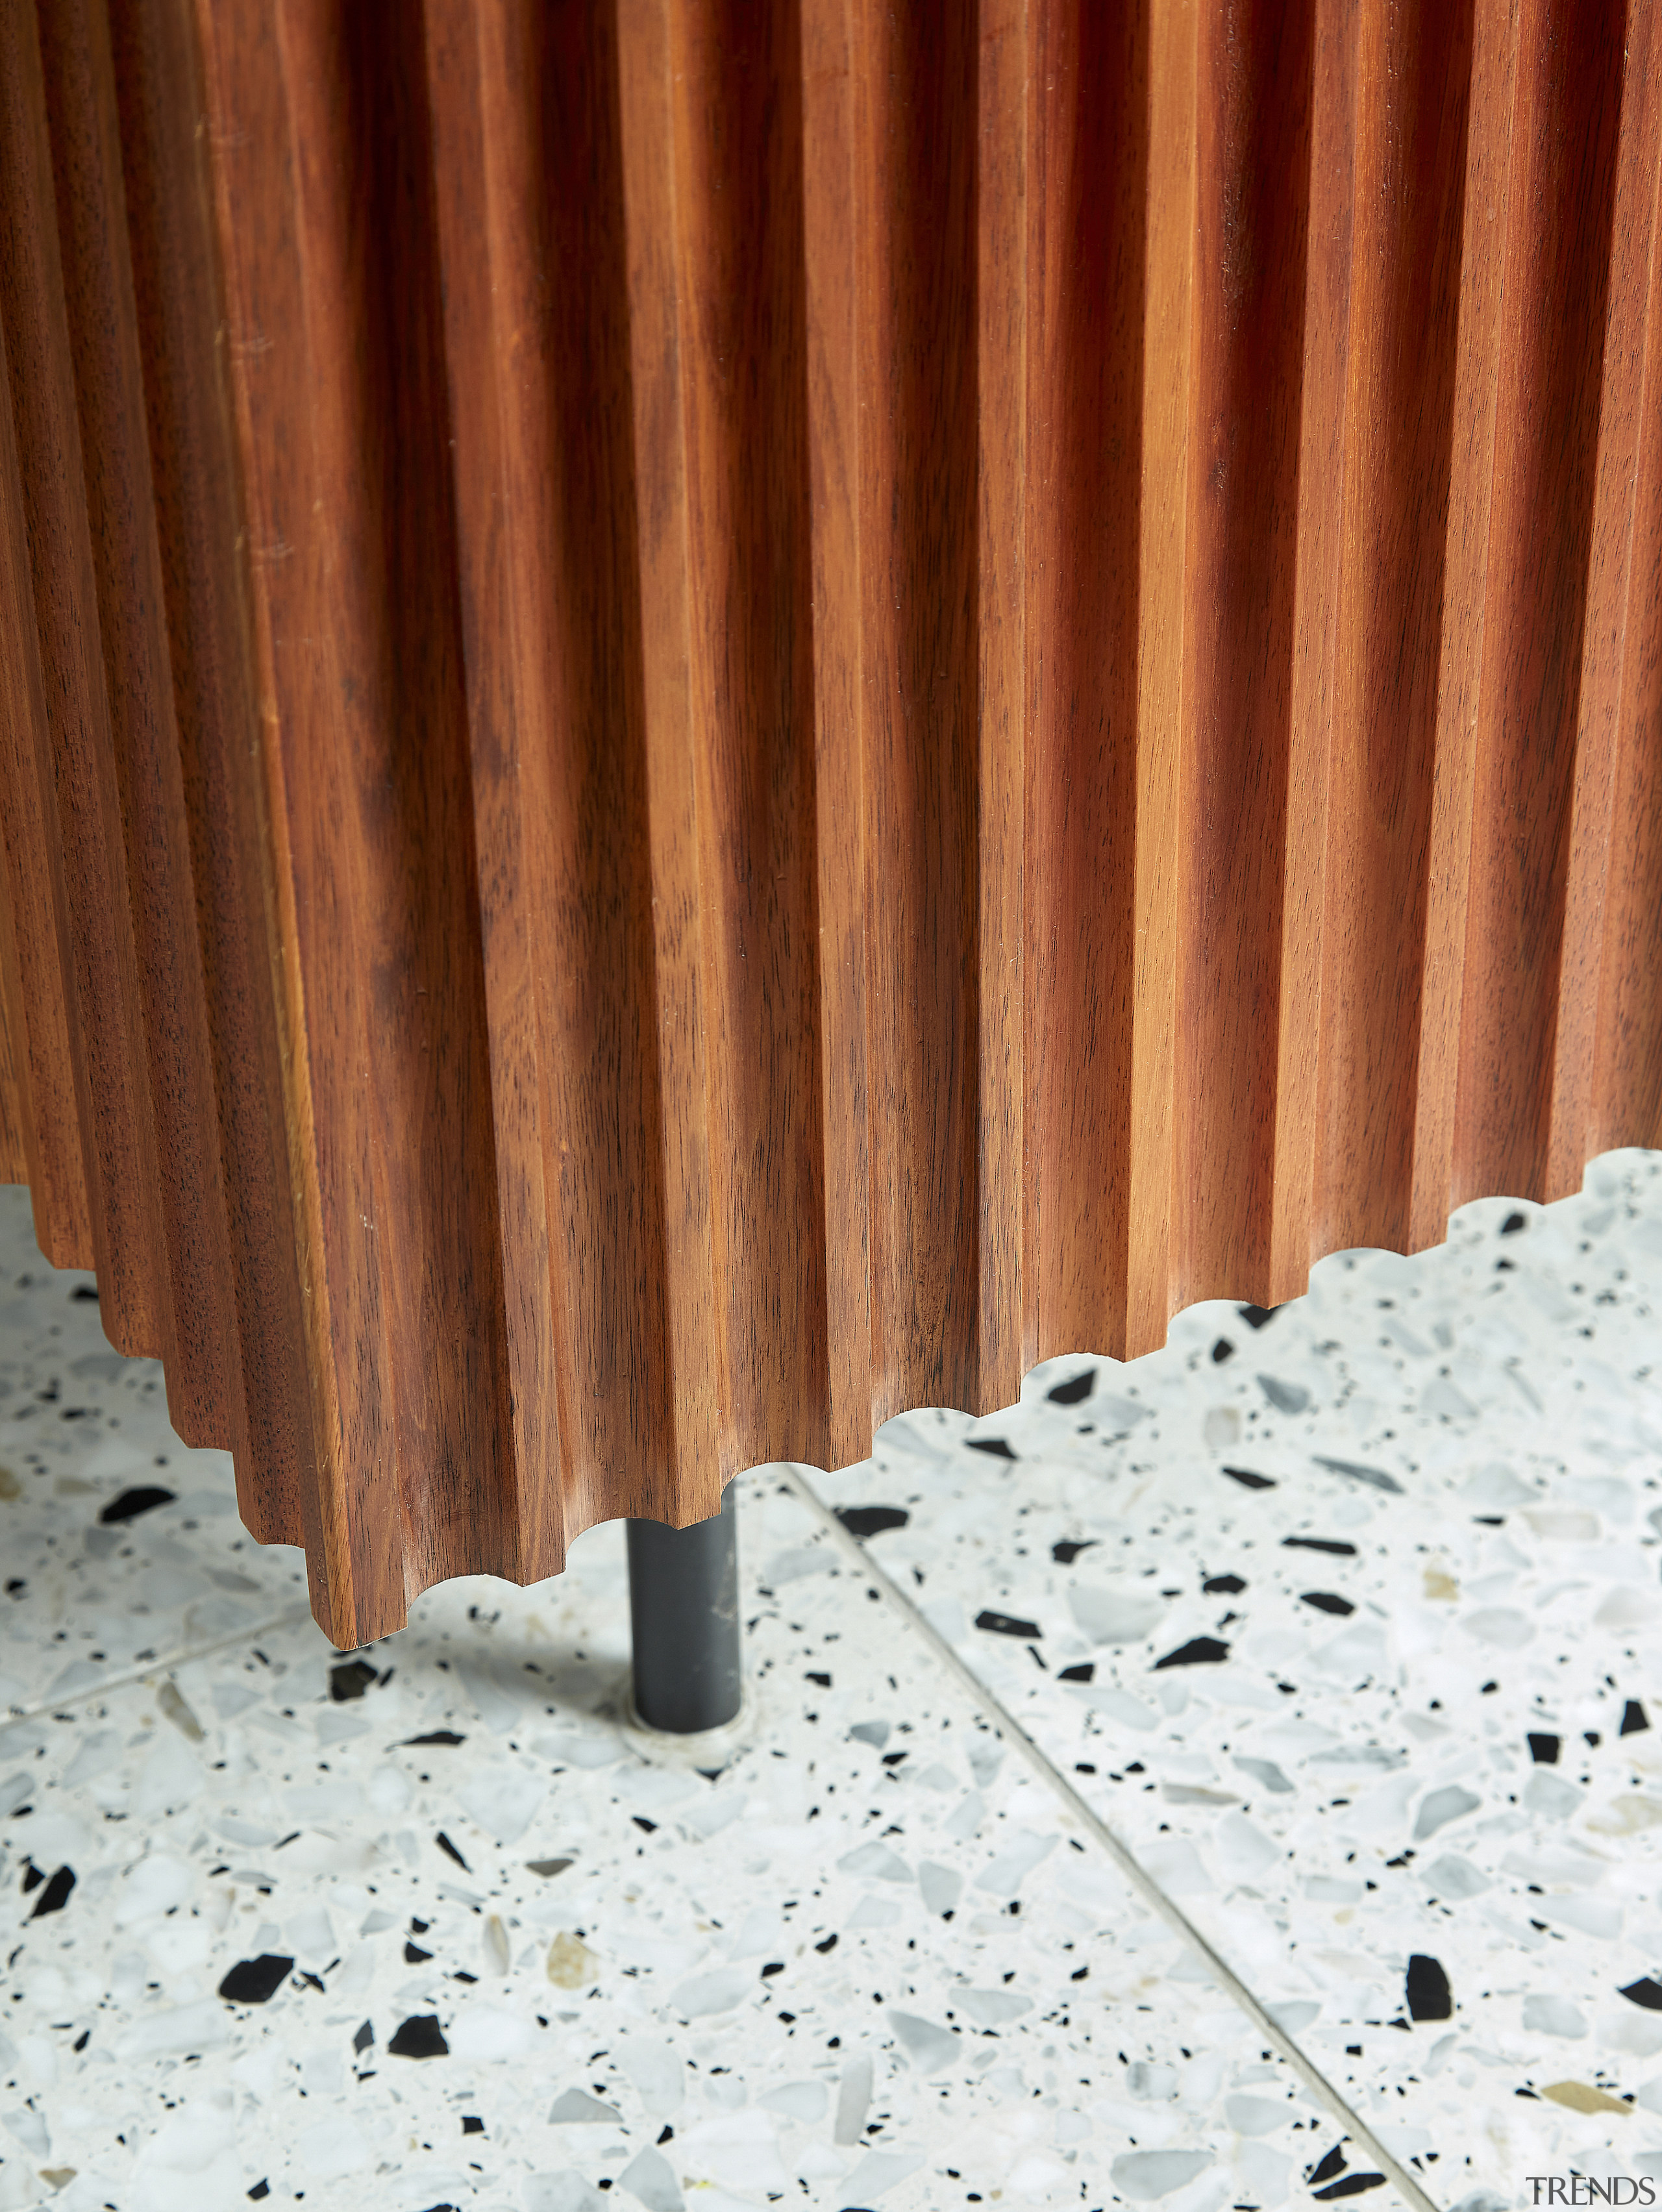 Timber was chosen to predominate in the design 